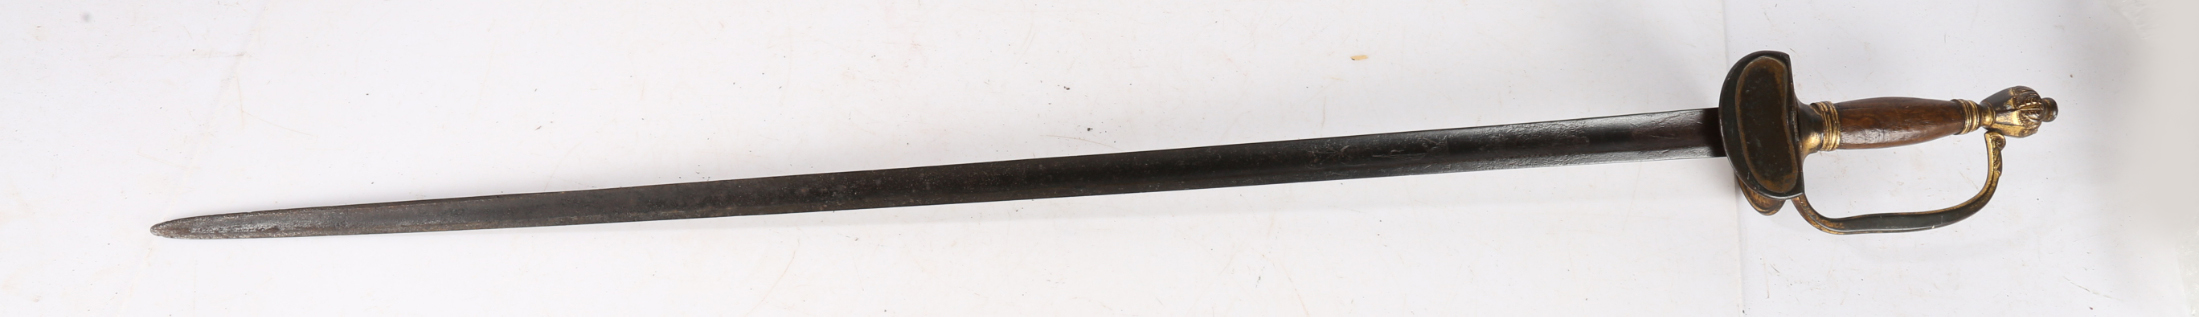 A British 1796 Pattern Officers Sword, steel blade engraved with crown over 'GR' and stand of arms - Image 2 of 7